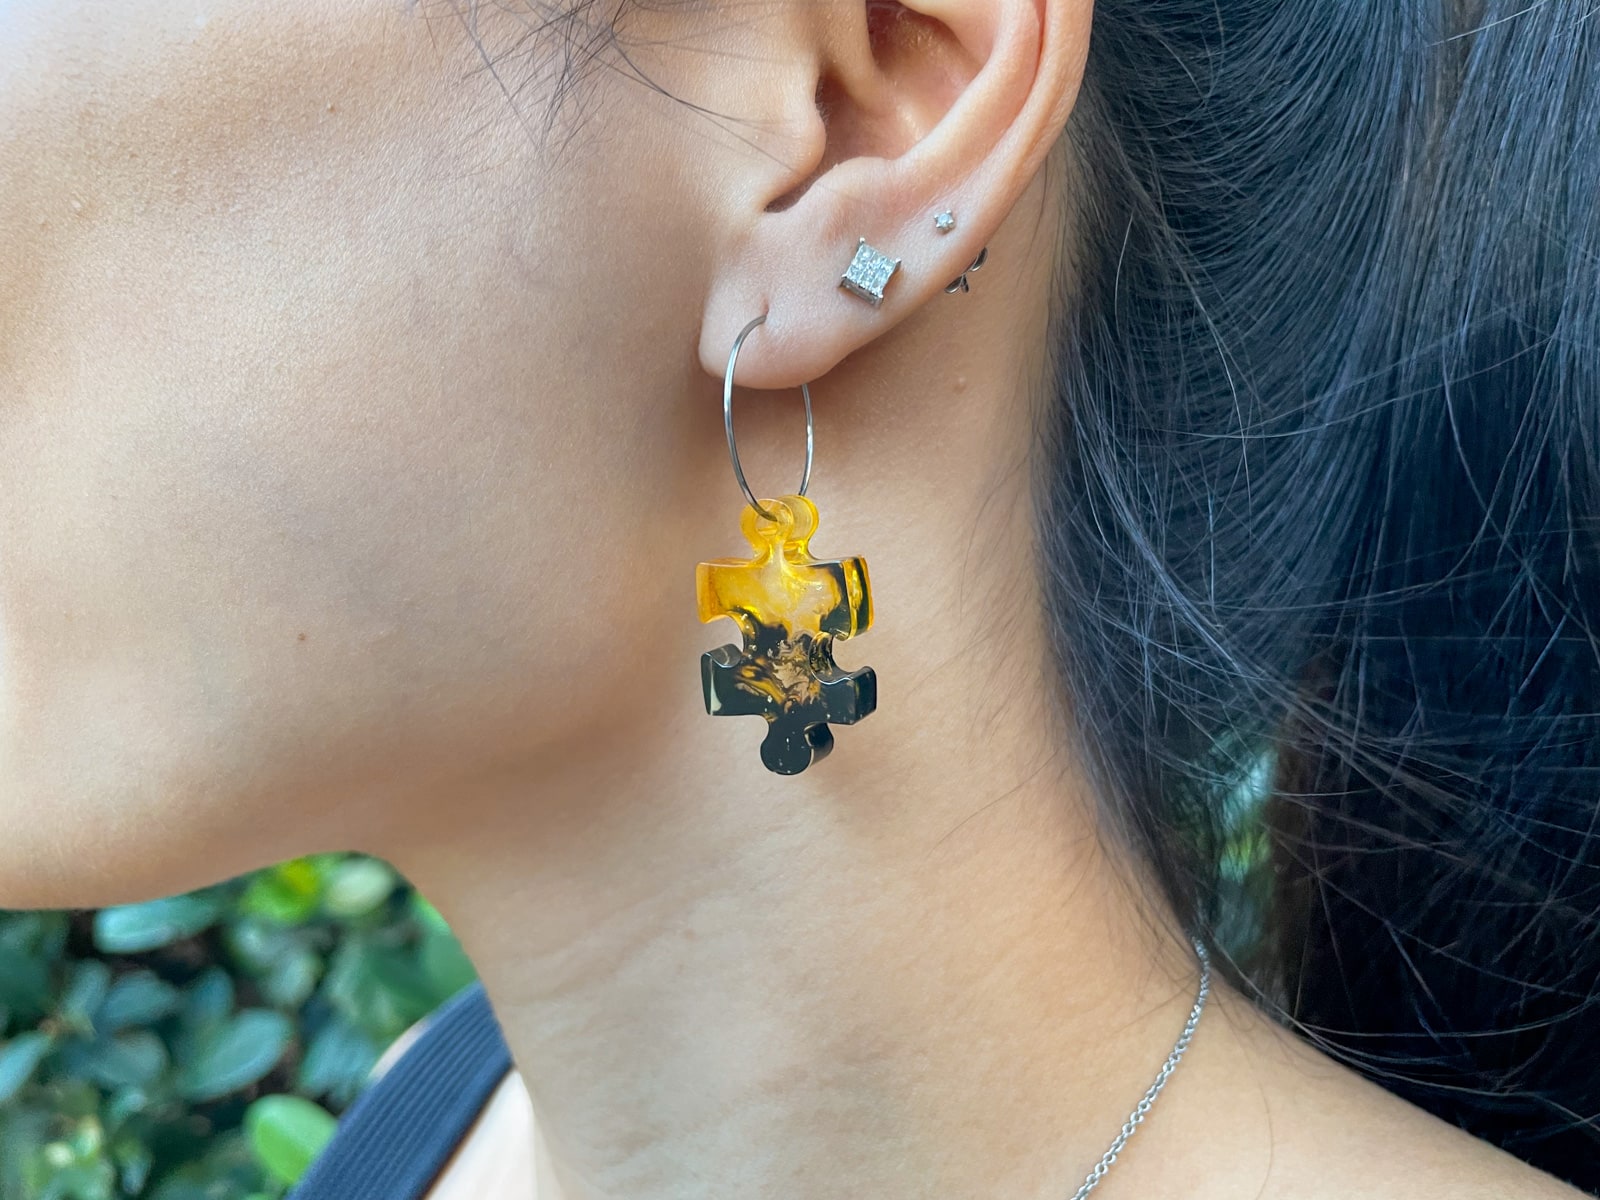 A close-up of a womanâ€™s ear with two silver earrings in the upper lobe, and a silver hoop earring with a yellow and black puzzle-shaped resin drop in the lower lobe.